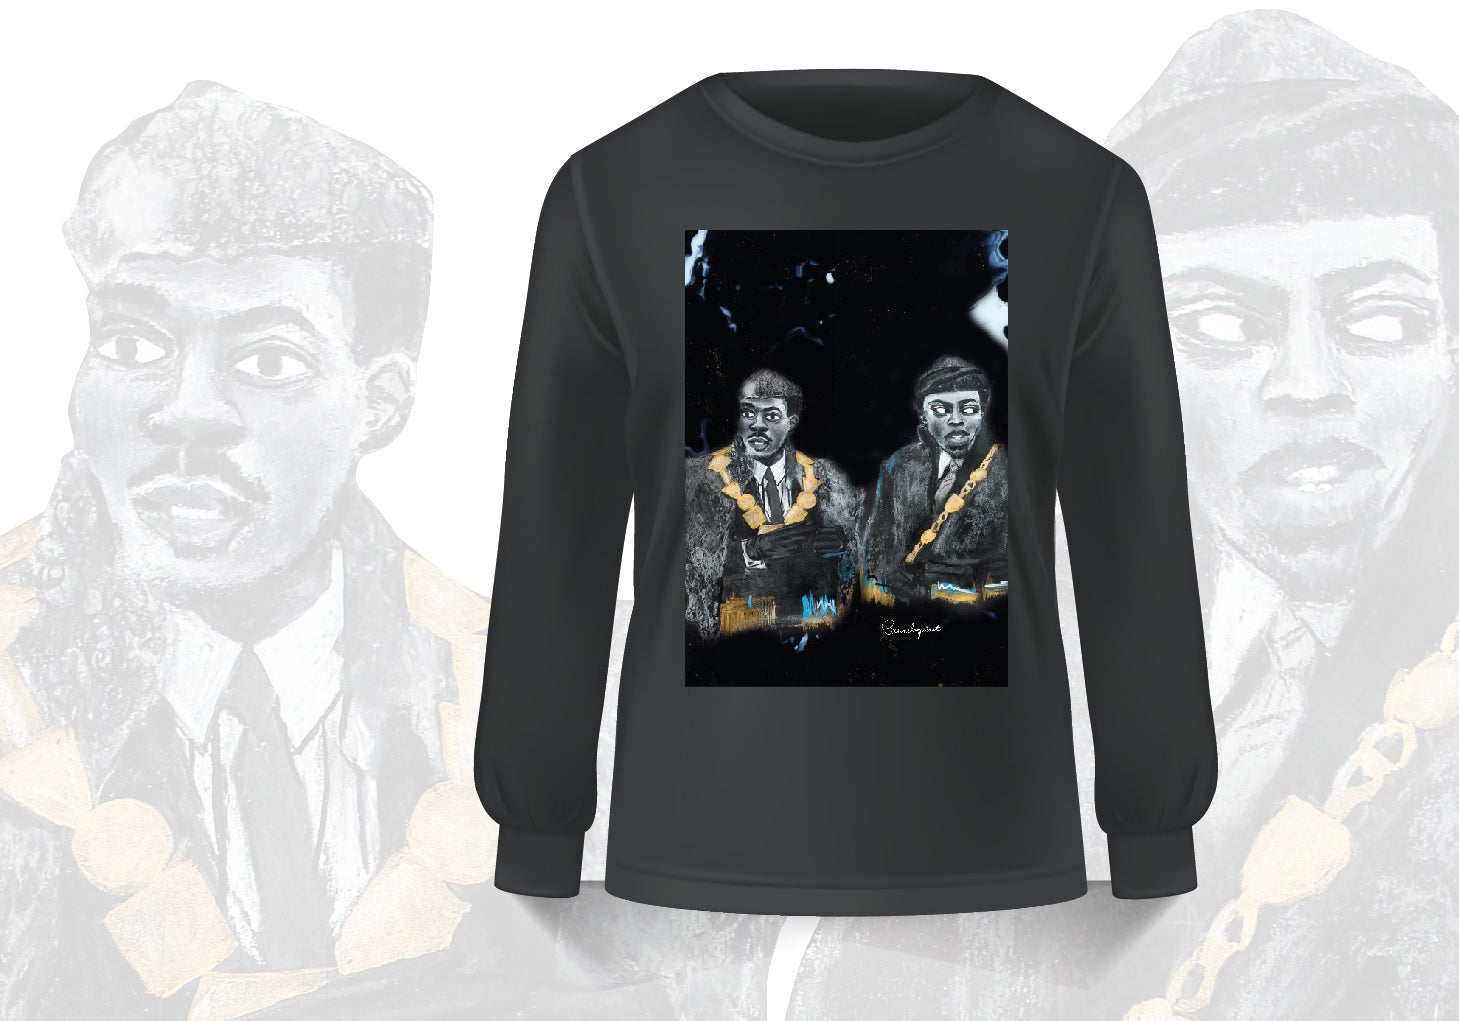 Comedic series: Coming to America Unisex Jumper